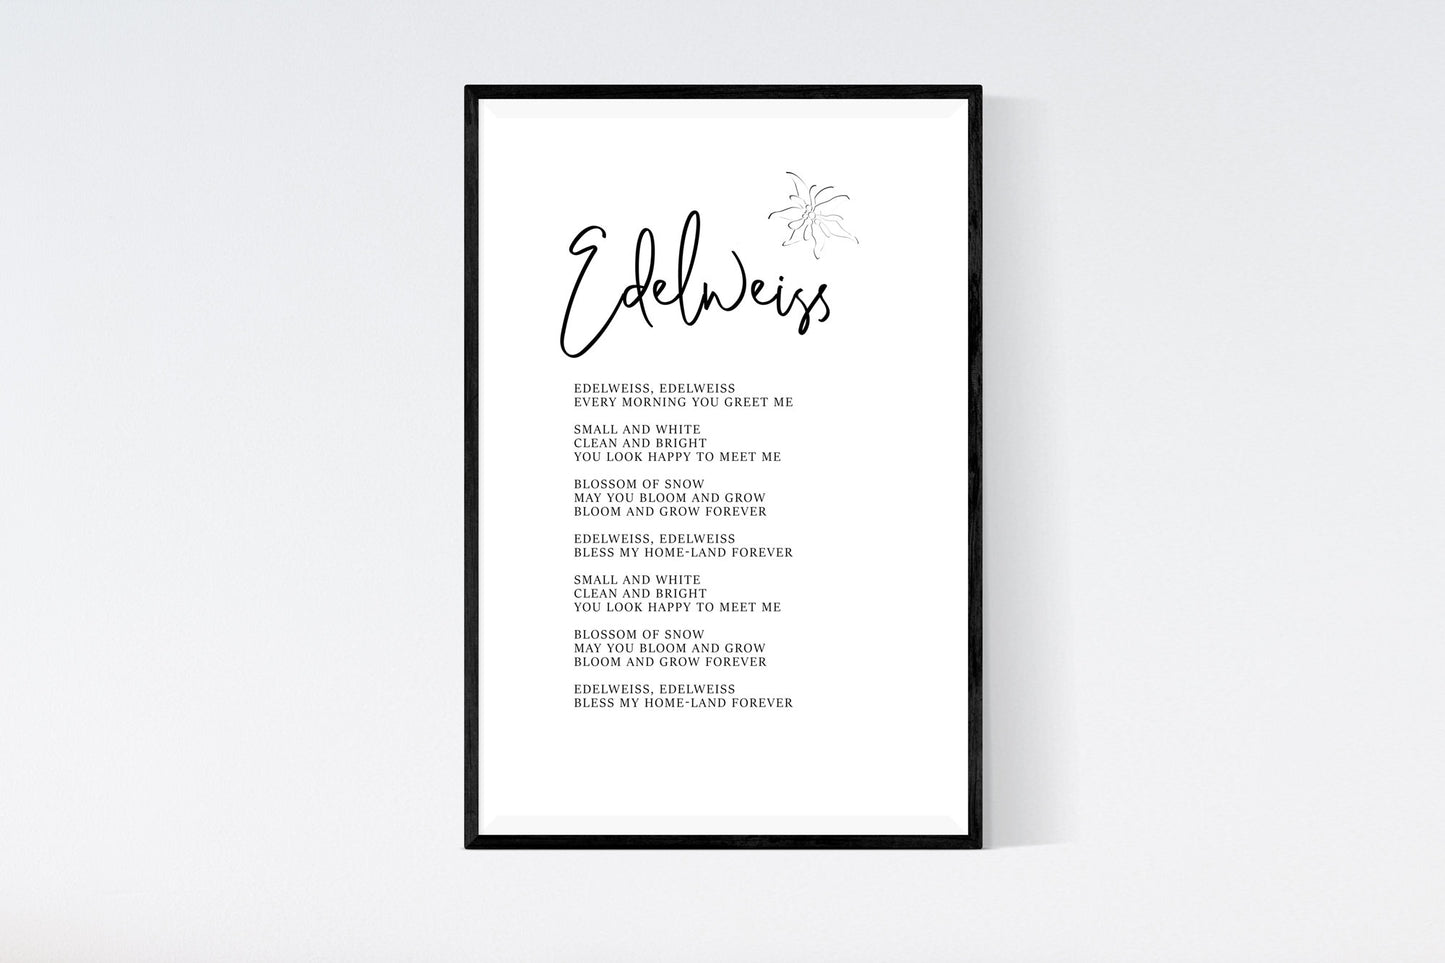 Edelweiss song lyrics in minimal black and white style featuring full lyrics "every morning you greet me, small and white, clean and bright, you look happy to meet me.."